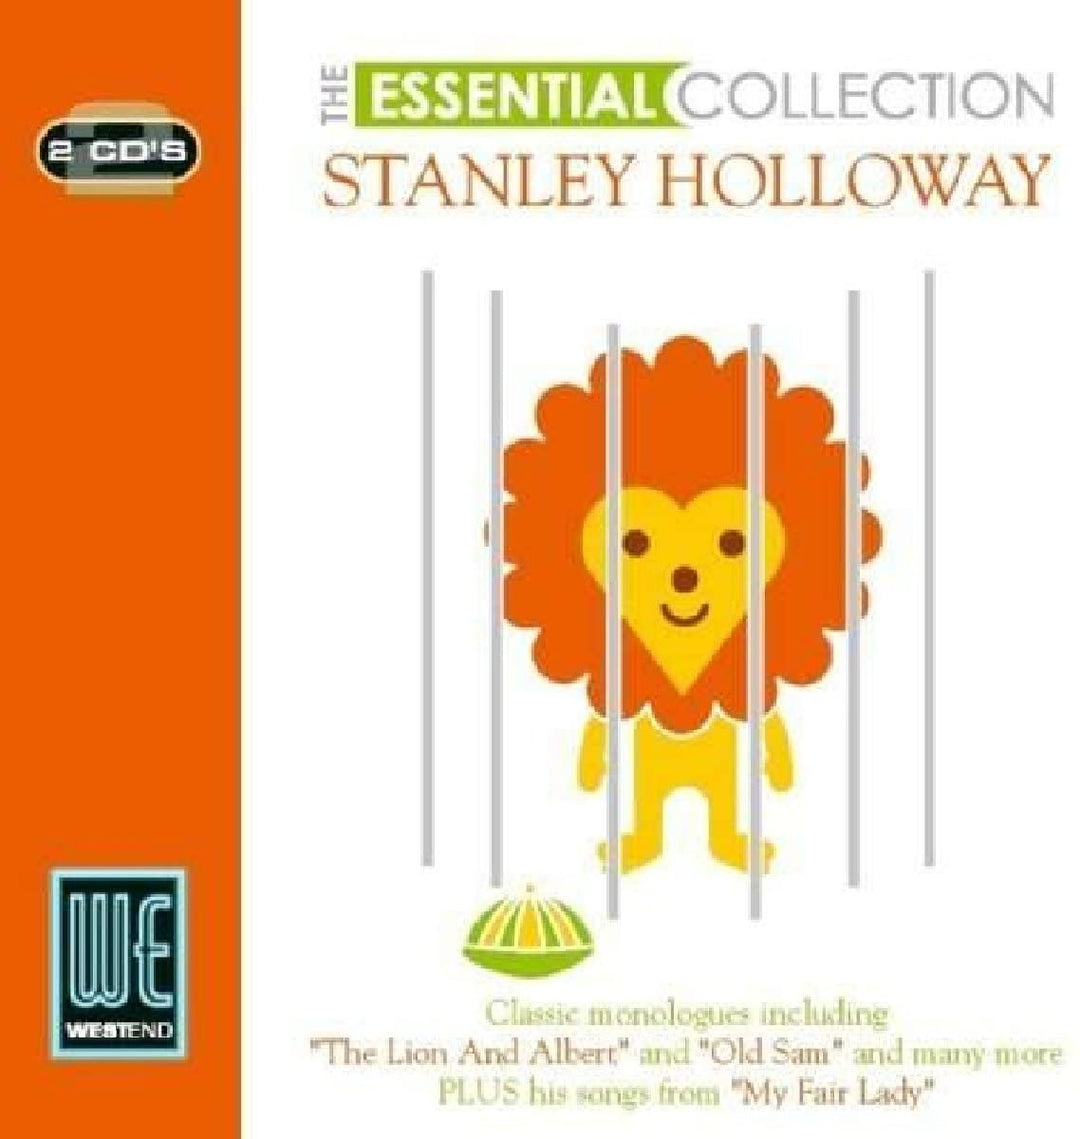 The Essential Collection - Stanley Holloway  [Audio CD]